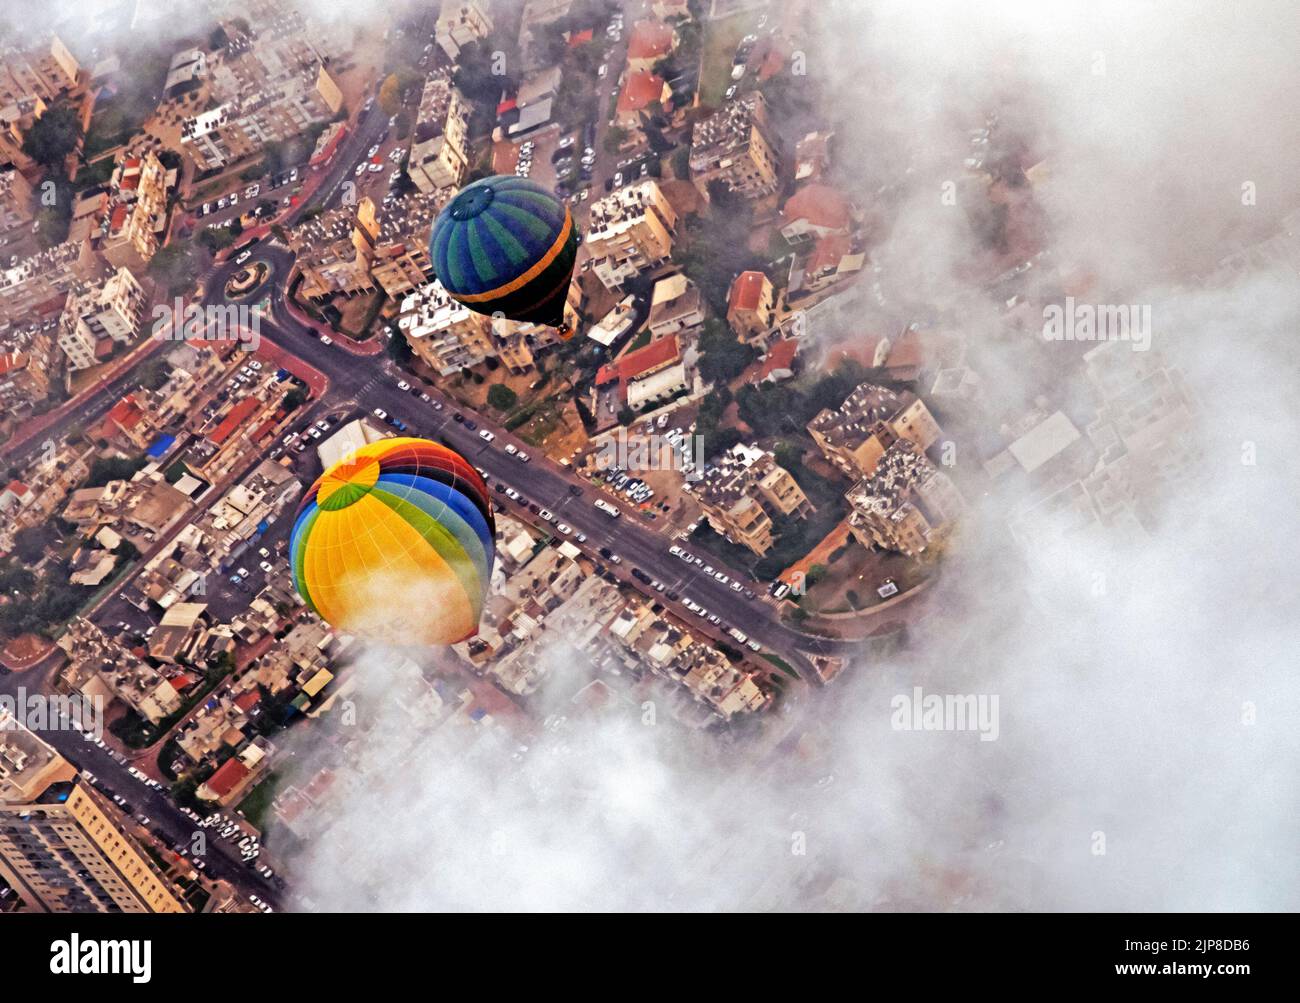 Hot Air Balloon floats in the air as seen from above Stock Photo